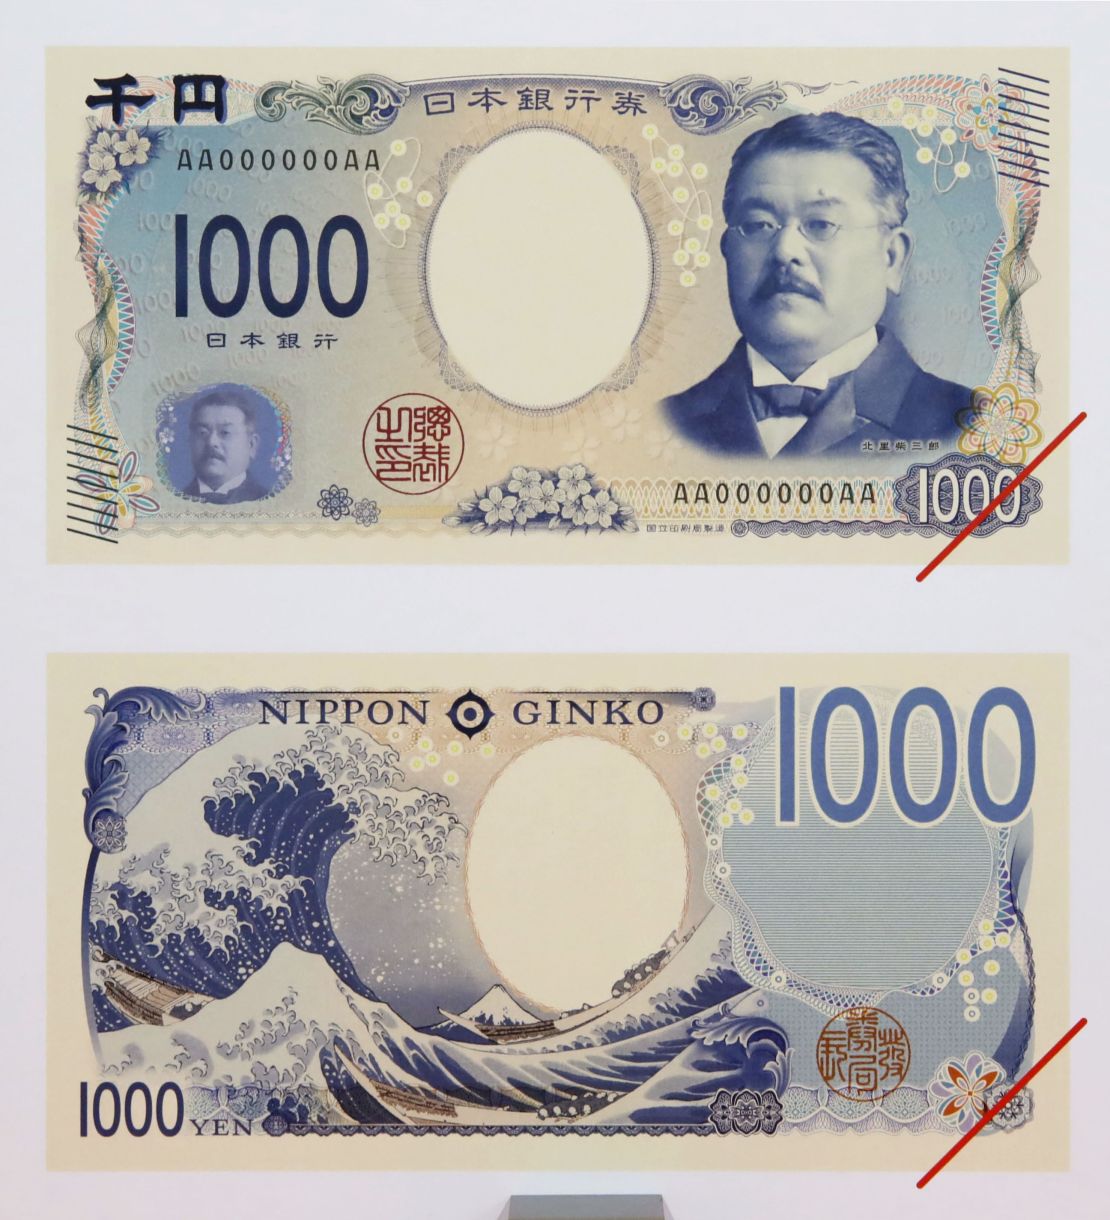 Photo taken at the Japanese Finance Ministry in Tokyo on April 9, 2019, shows the front (top) and back of a sample of the new 1,000 yen bill. 